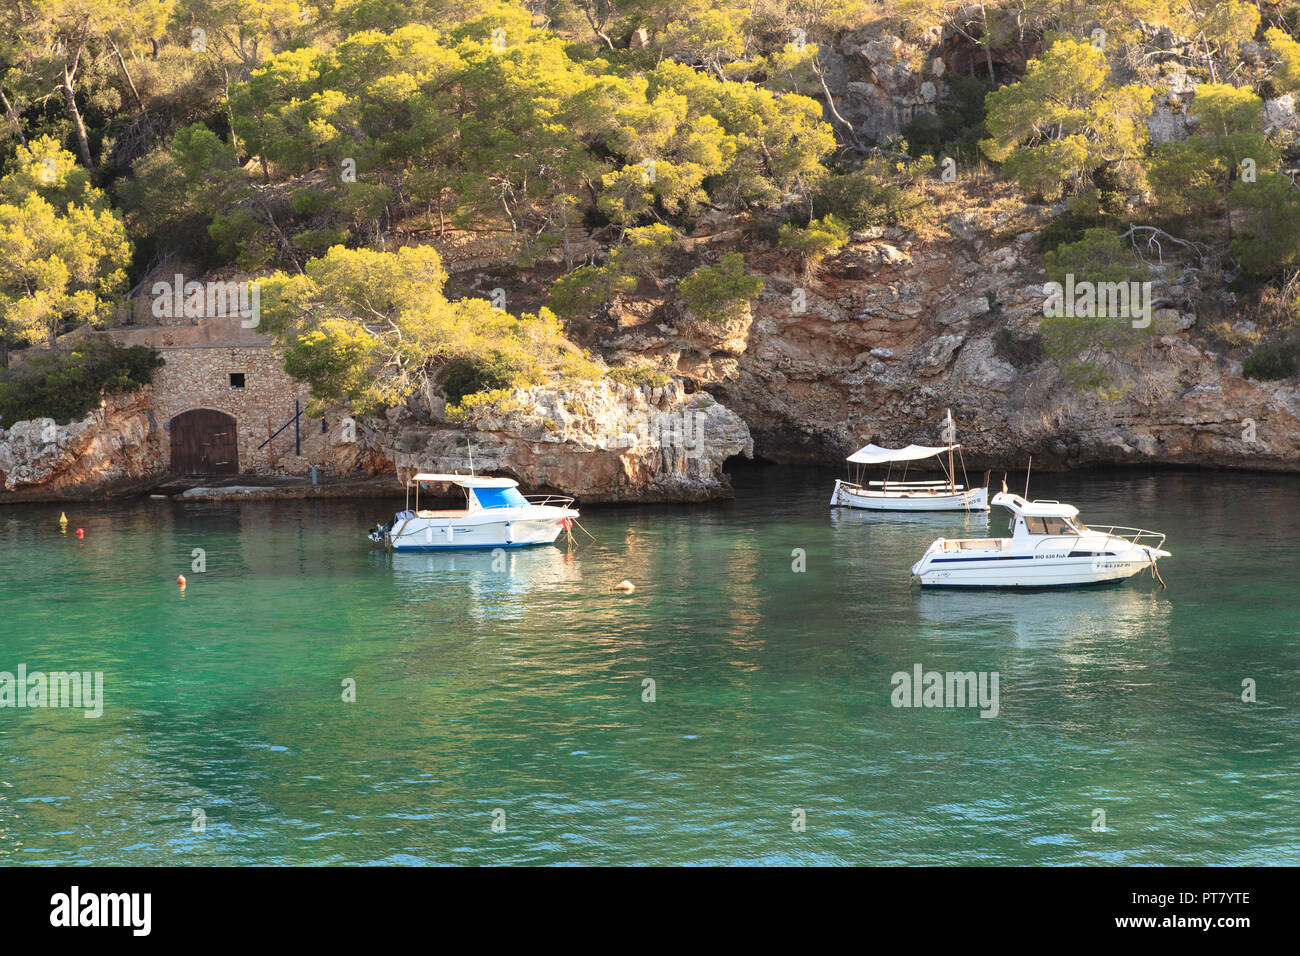 Early in the morning in the port of Cala Figuera, Santanyi, Europe, Spain, Mallorca, Cala Figuera, Santanyi, Balearic Islands, Spain, Mediterranean Se Stock Photo